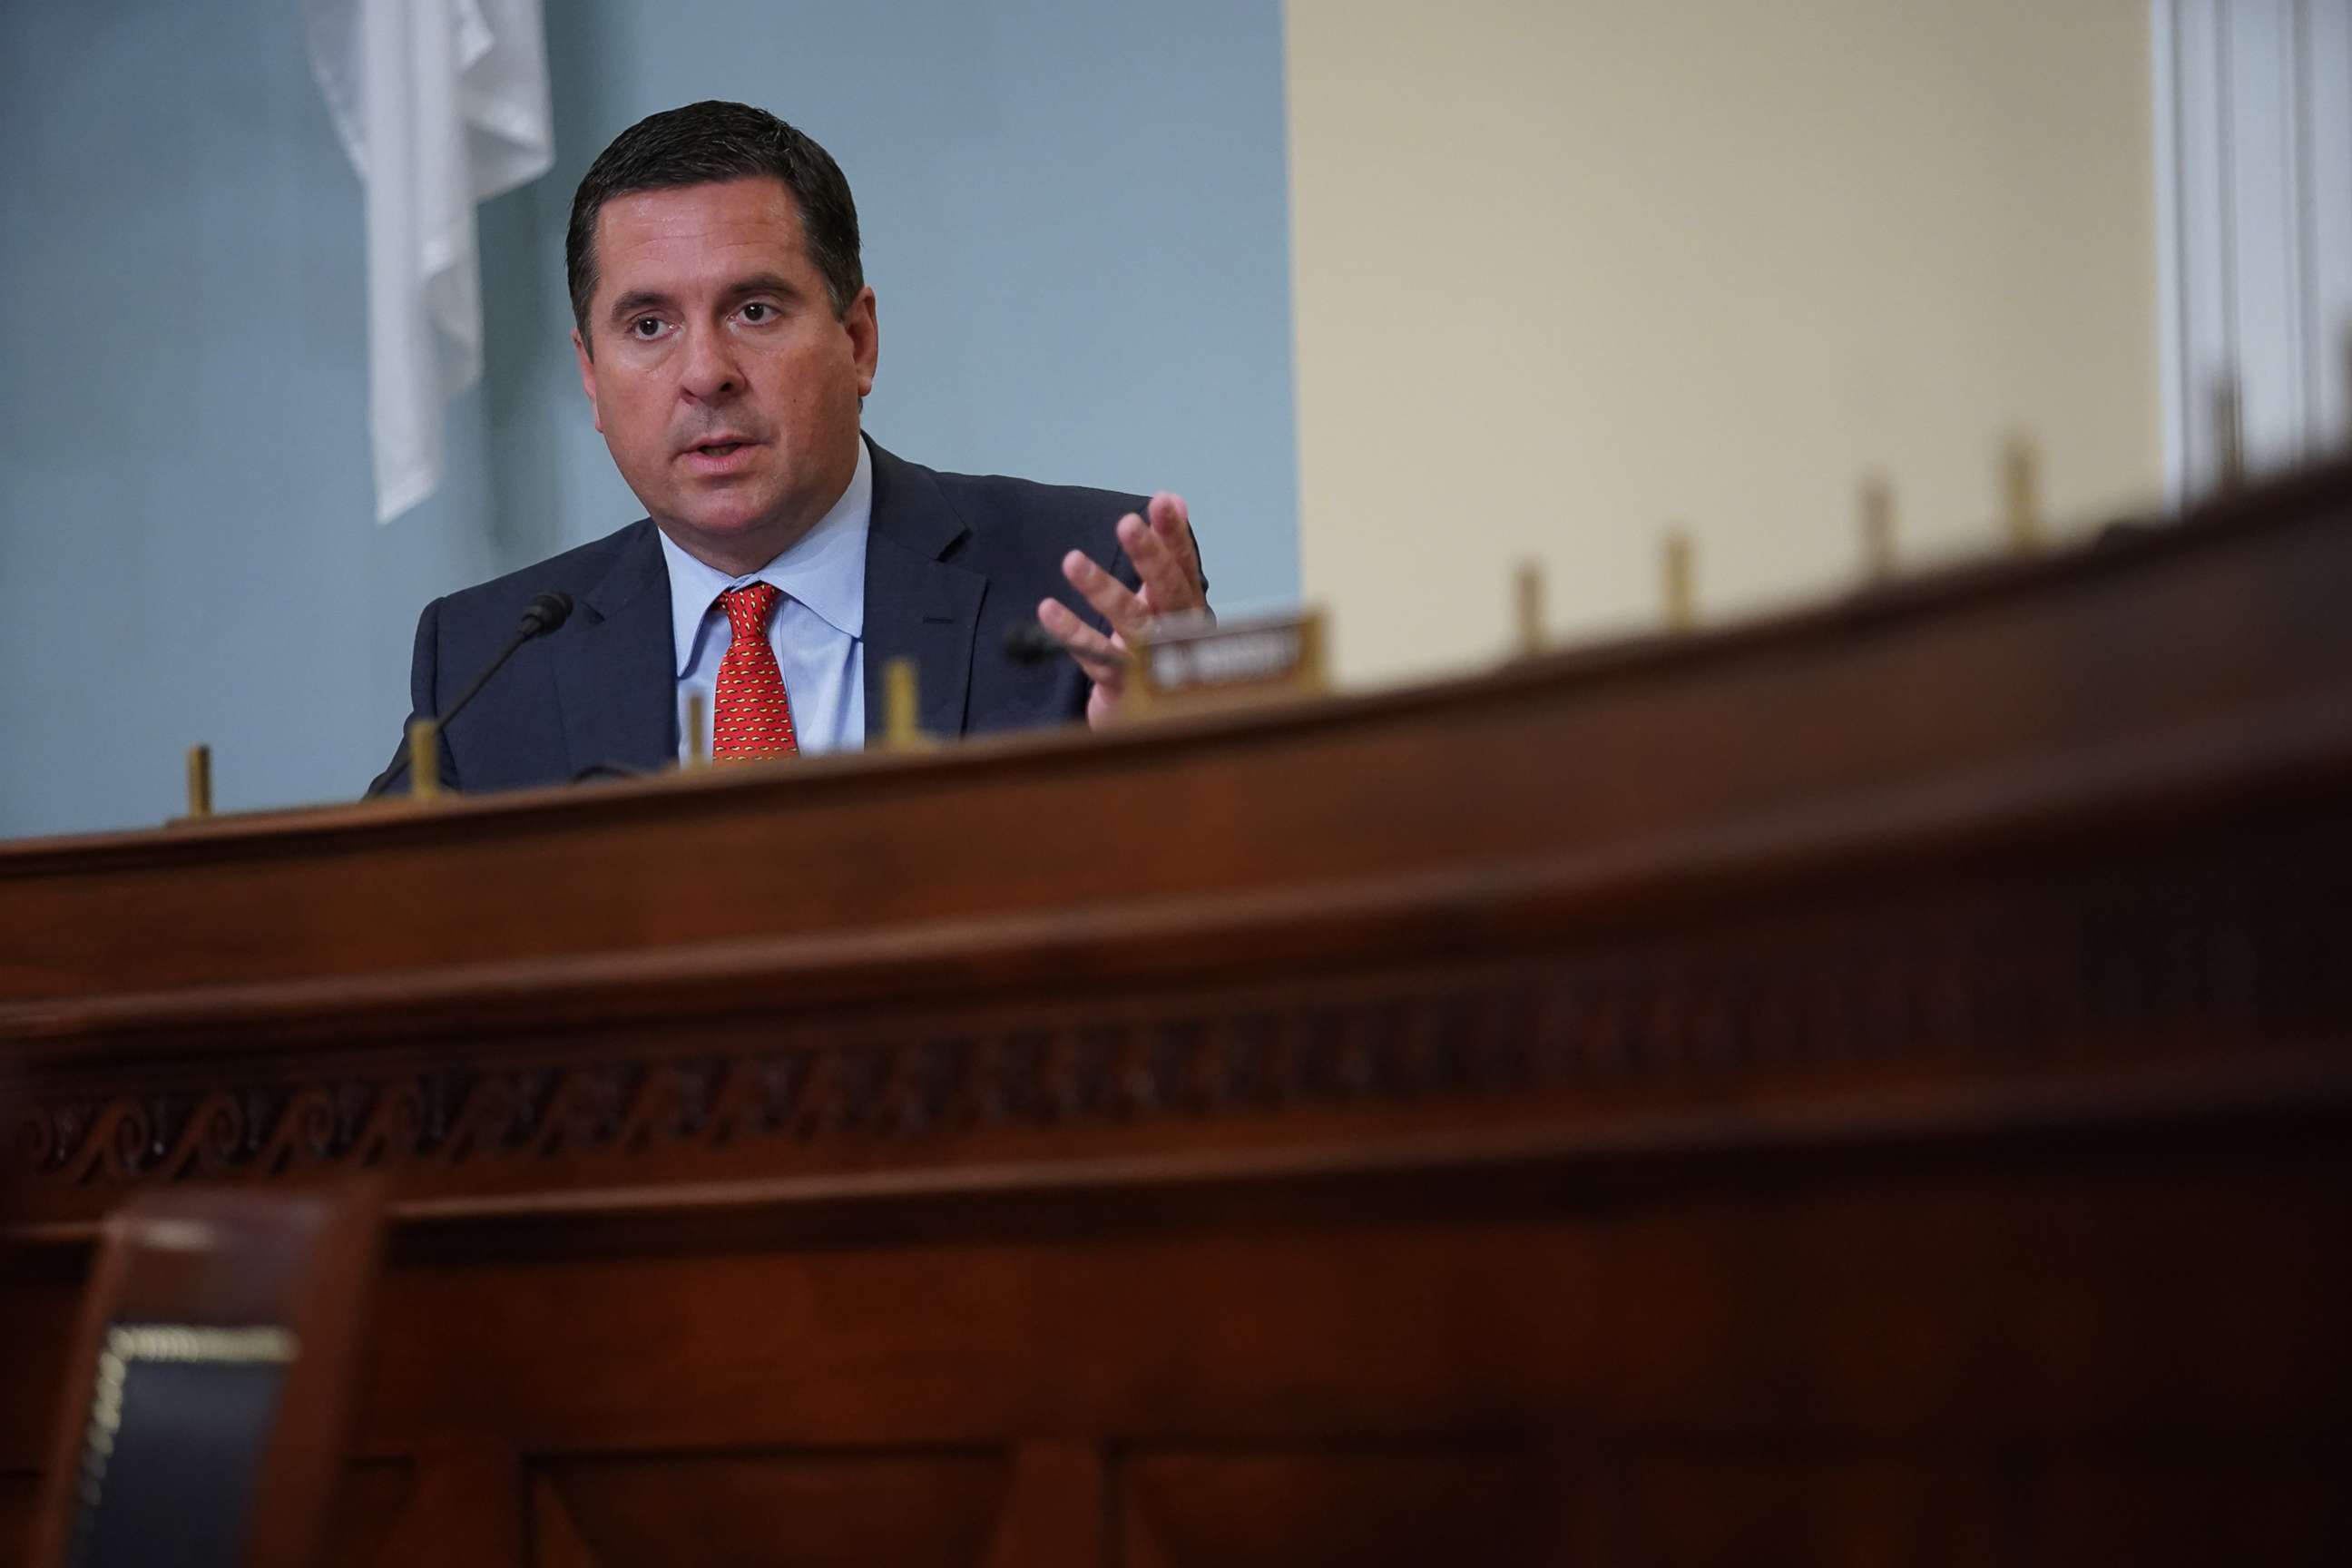 PHOTO: Rep. Devin Nunes speaks during a House Intelligence Committee hearing in Washington, April 15, 2021.